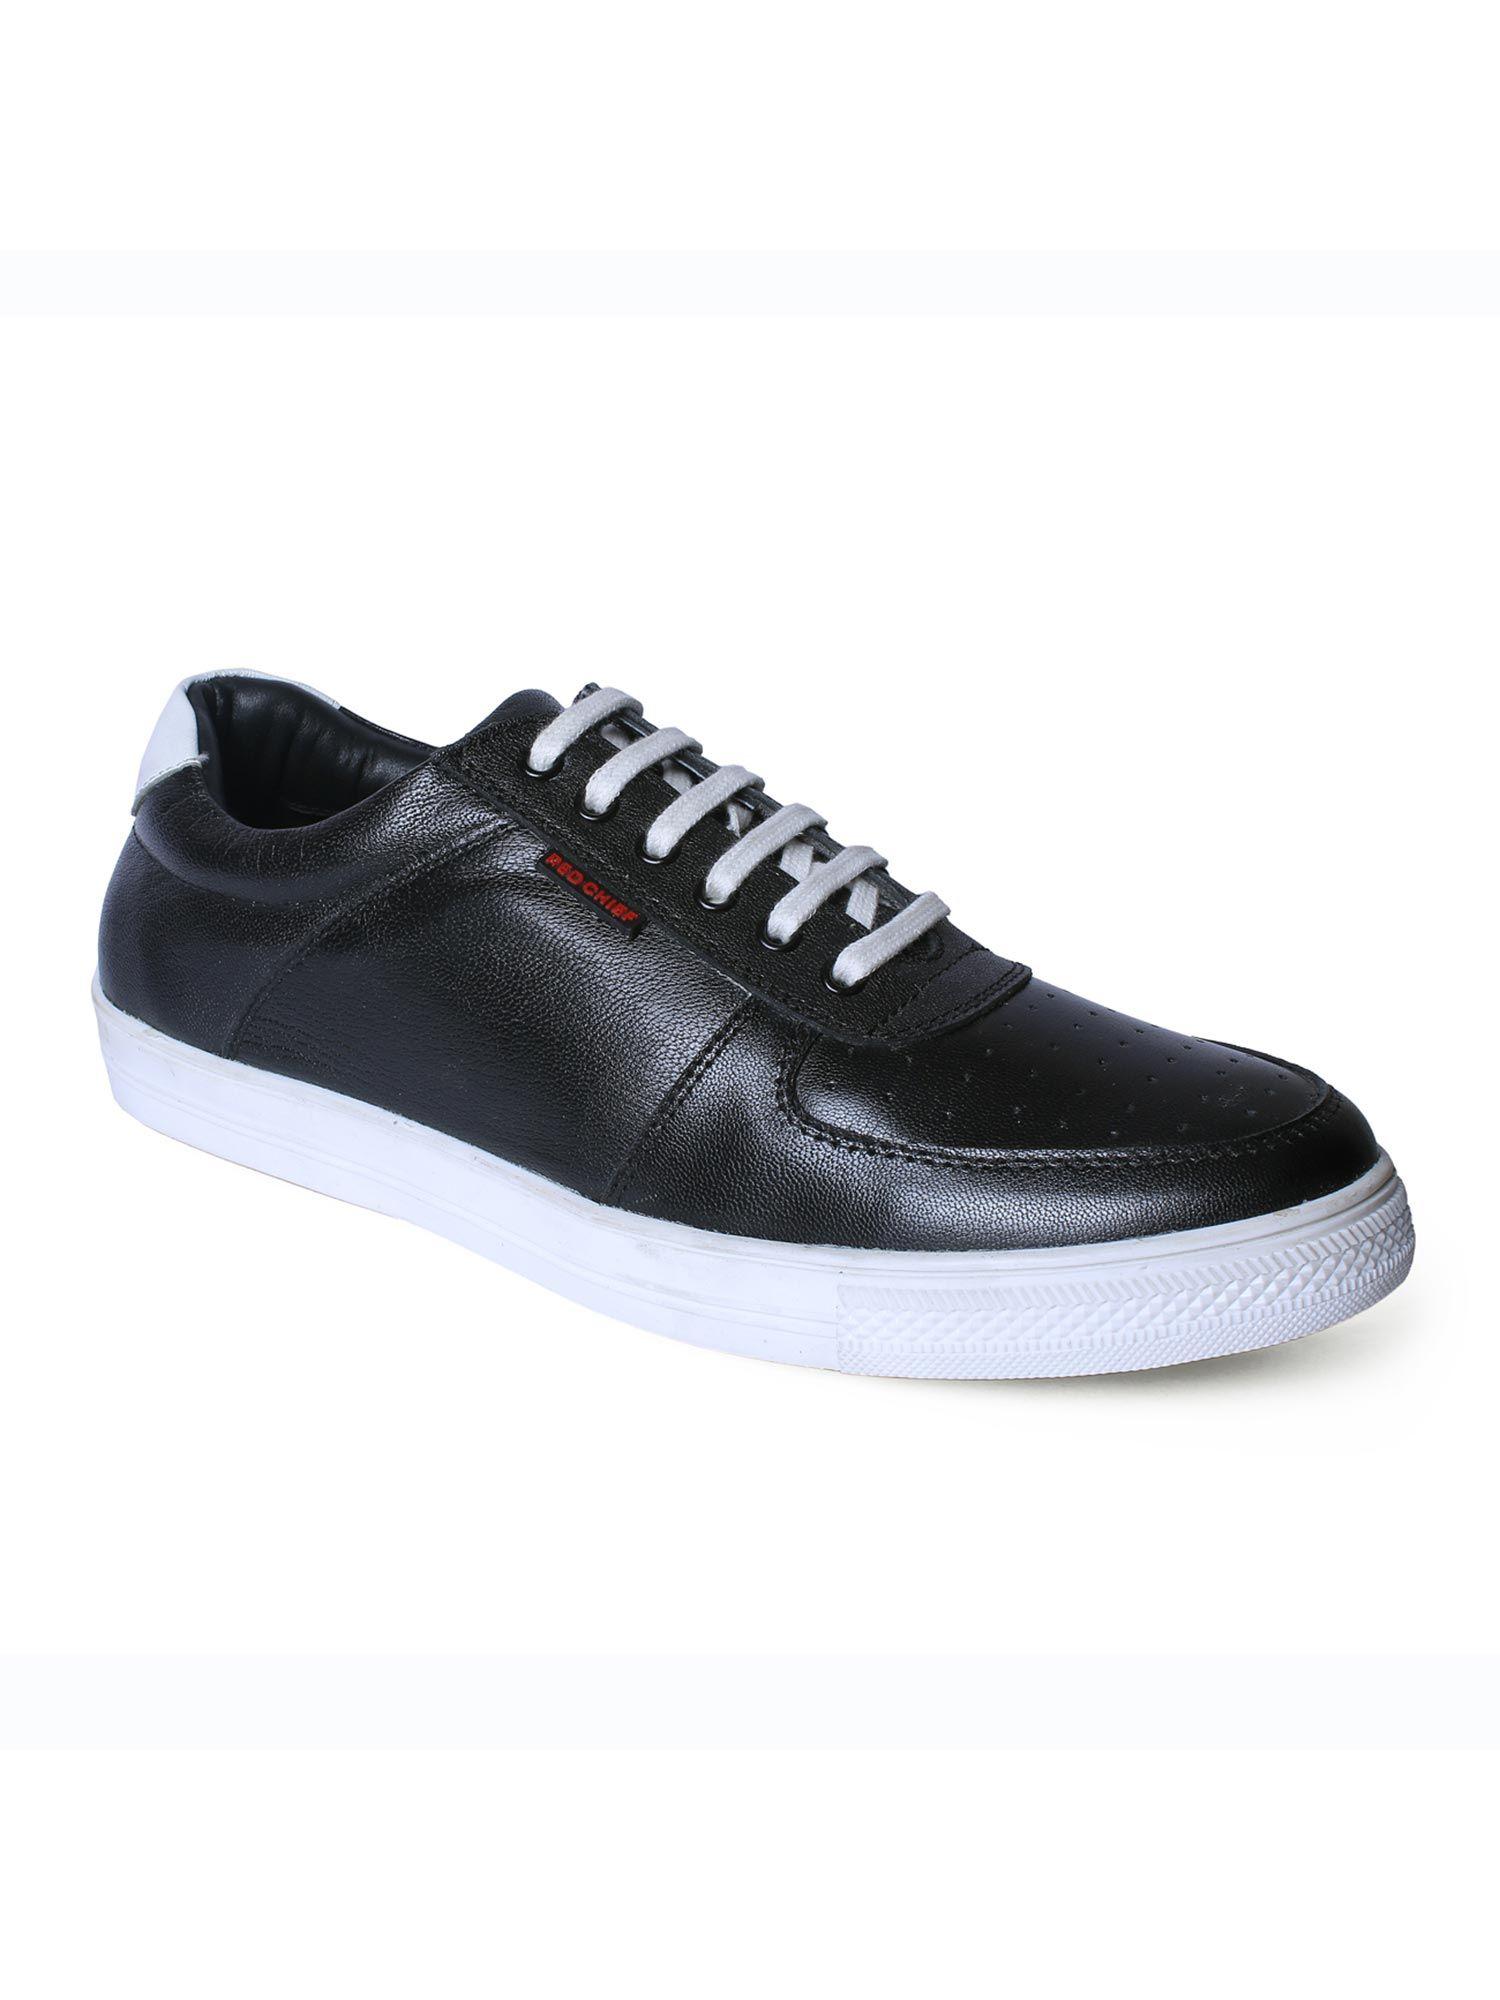 black-leather-sneakers